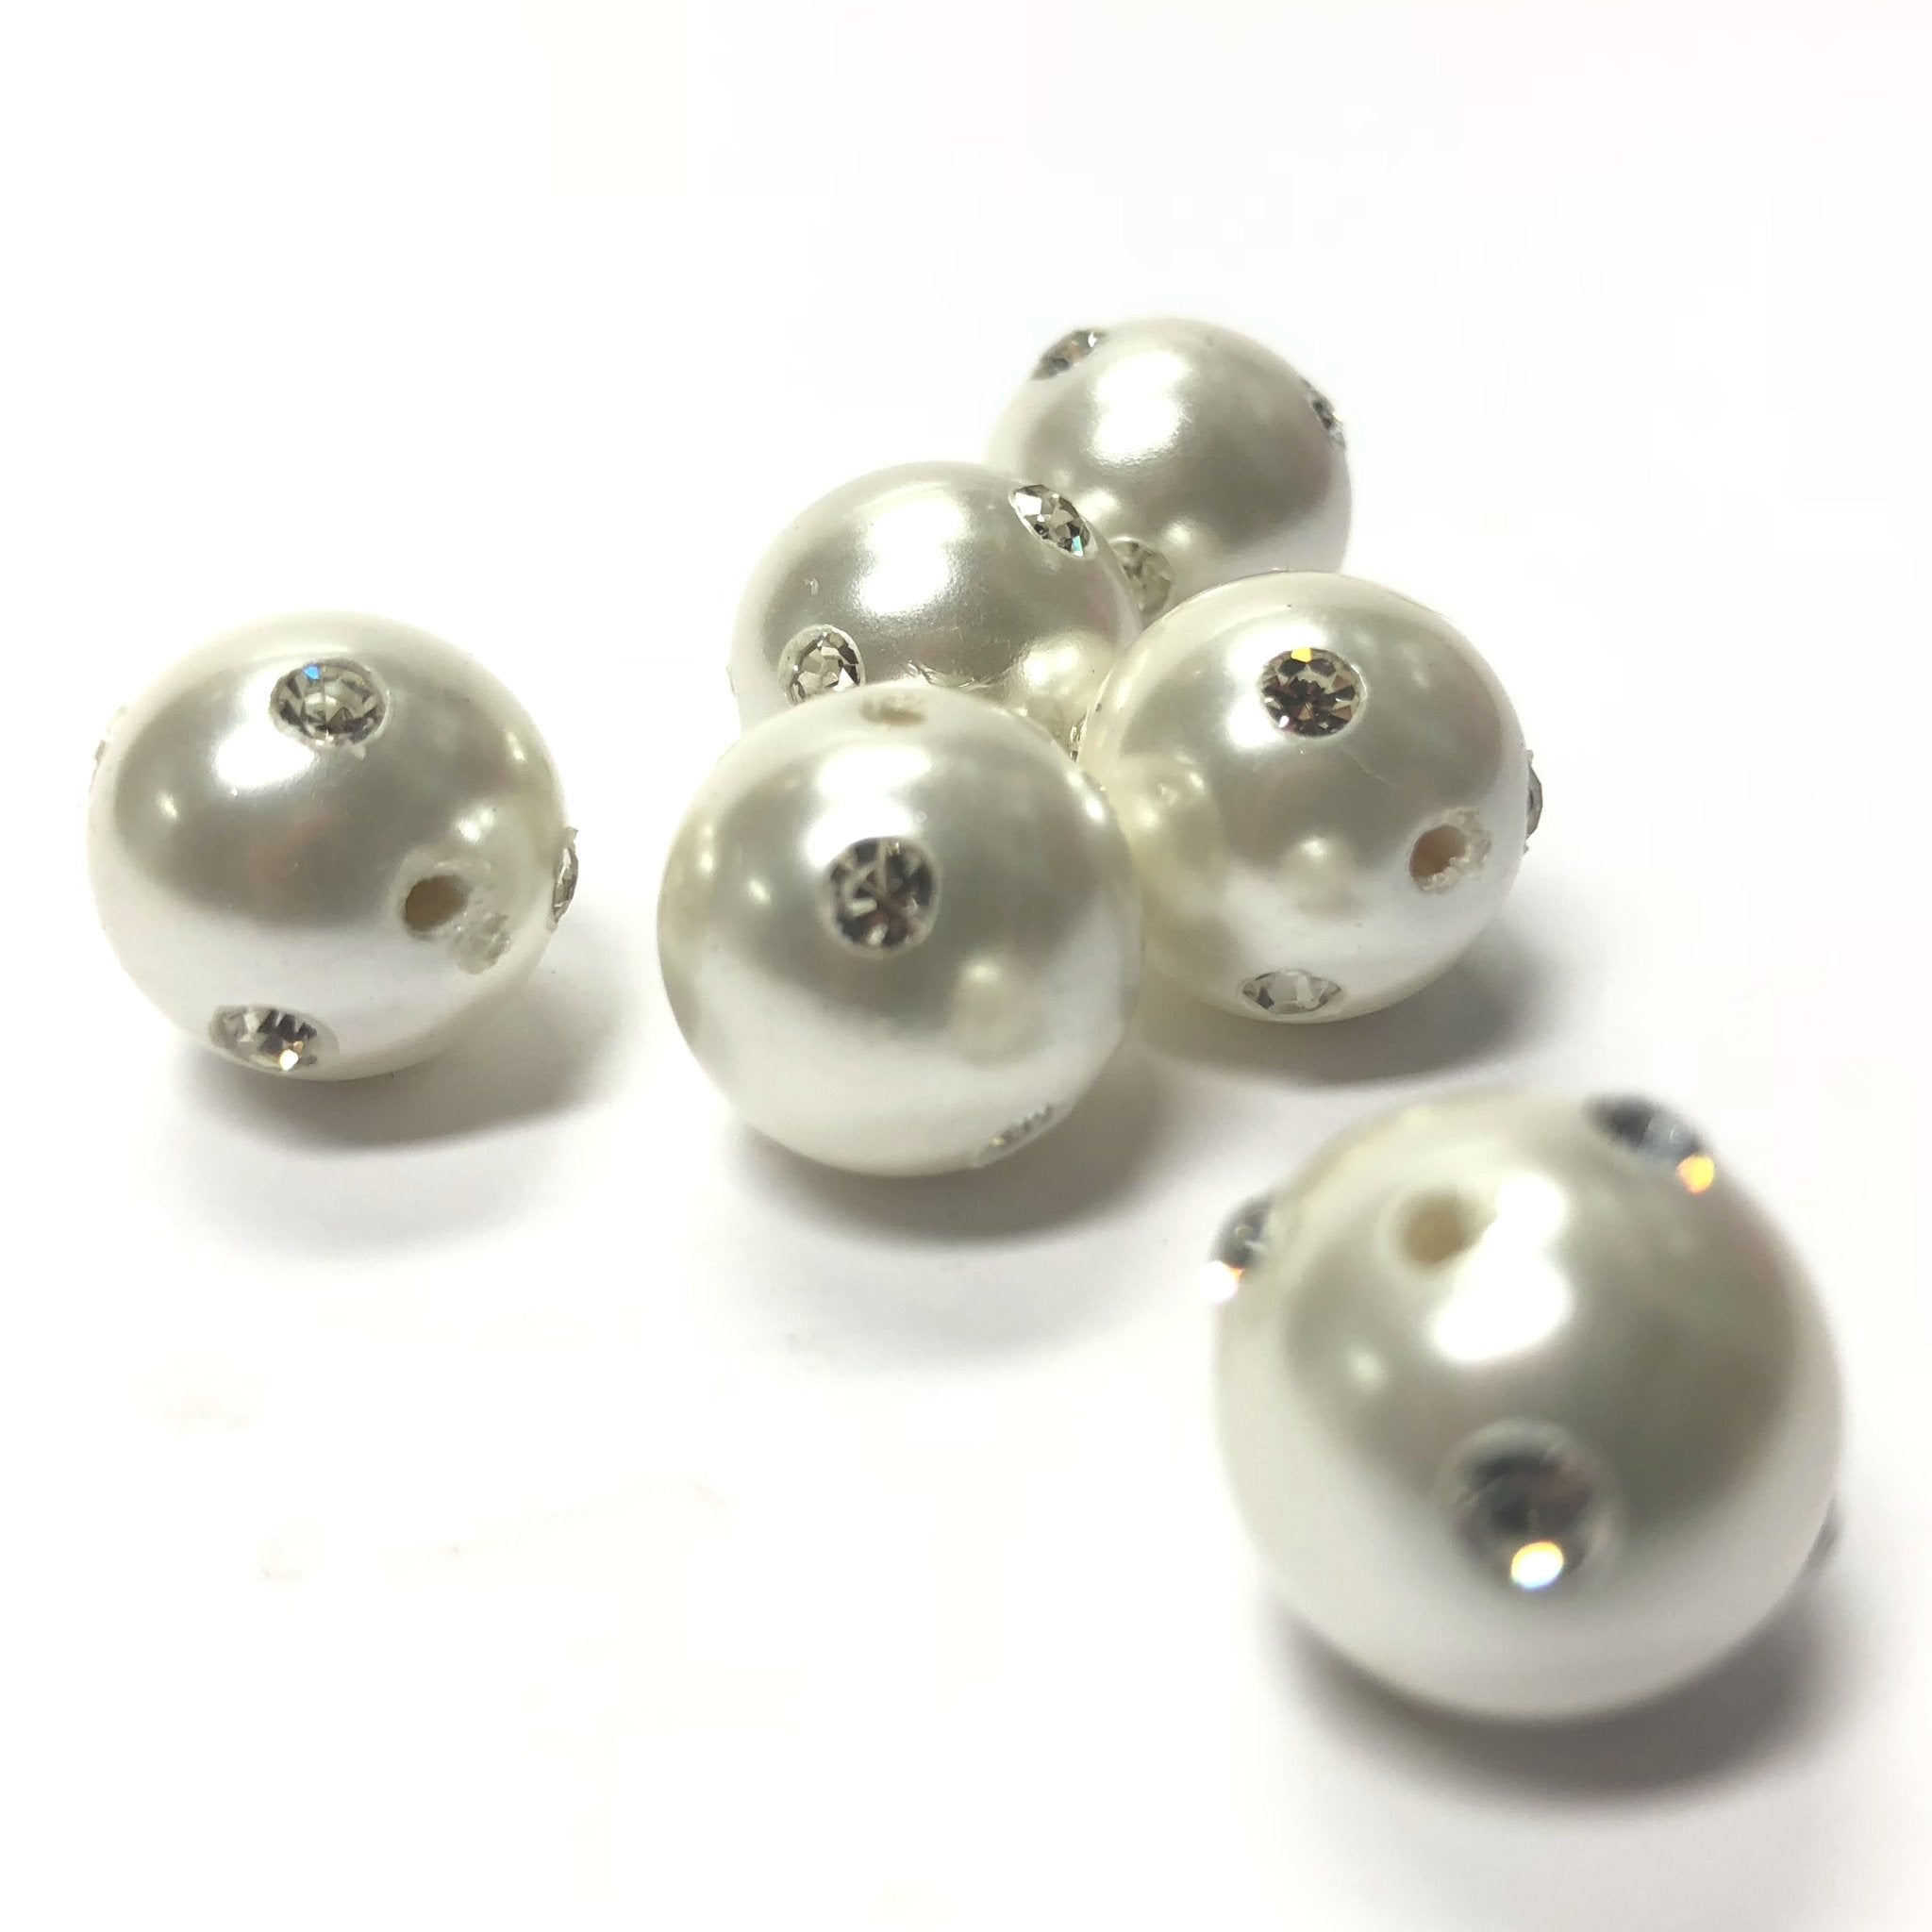 100 Silver Metallic Pearl Beads for Bracelets 4mm Round Acrylic